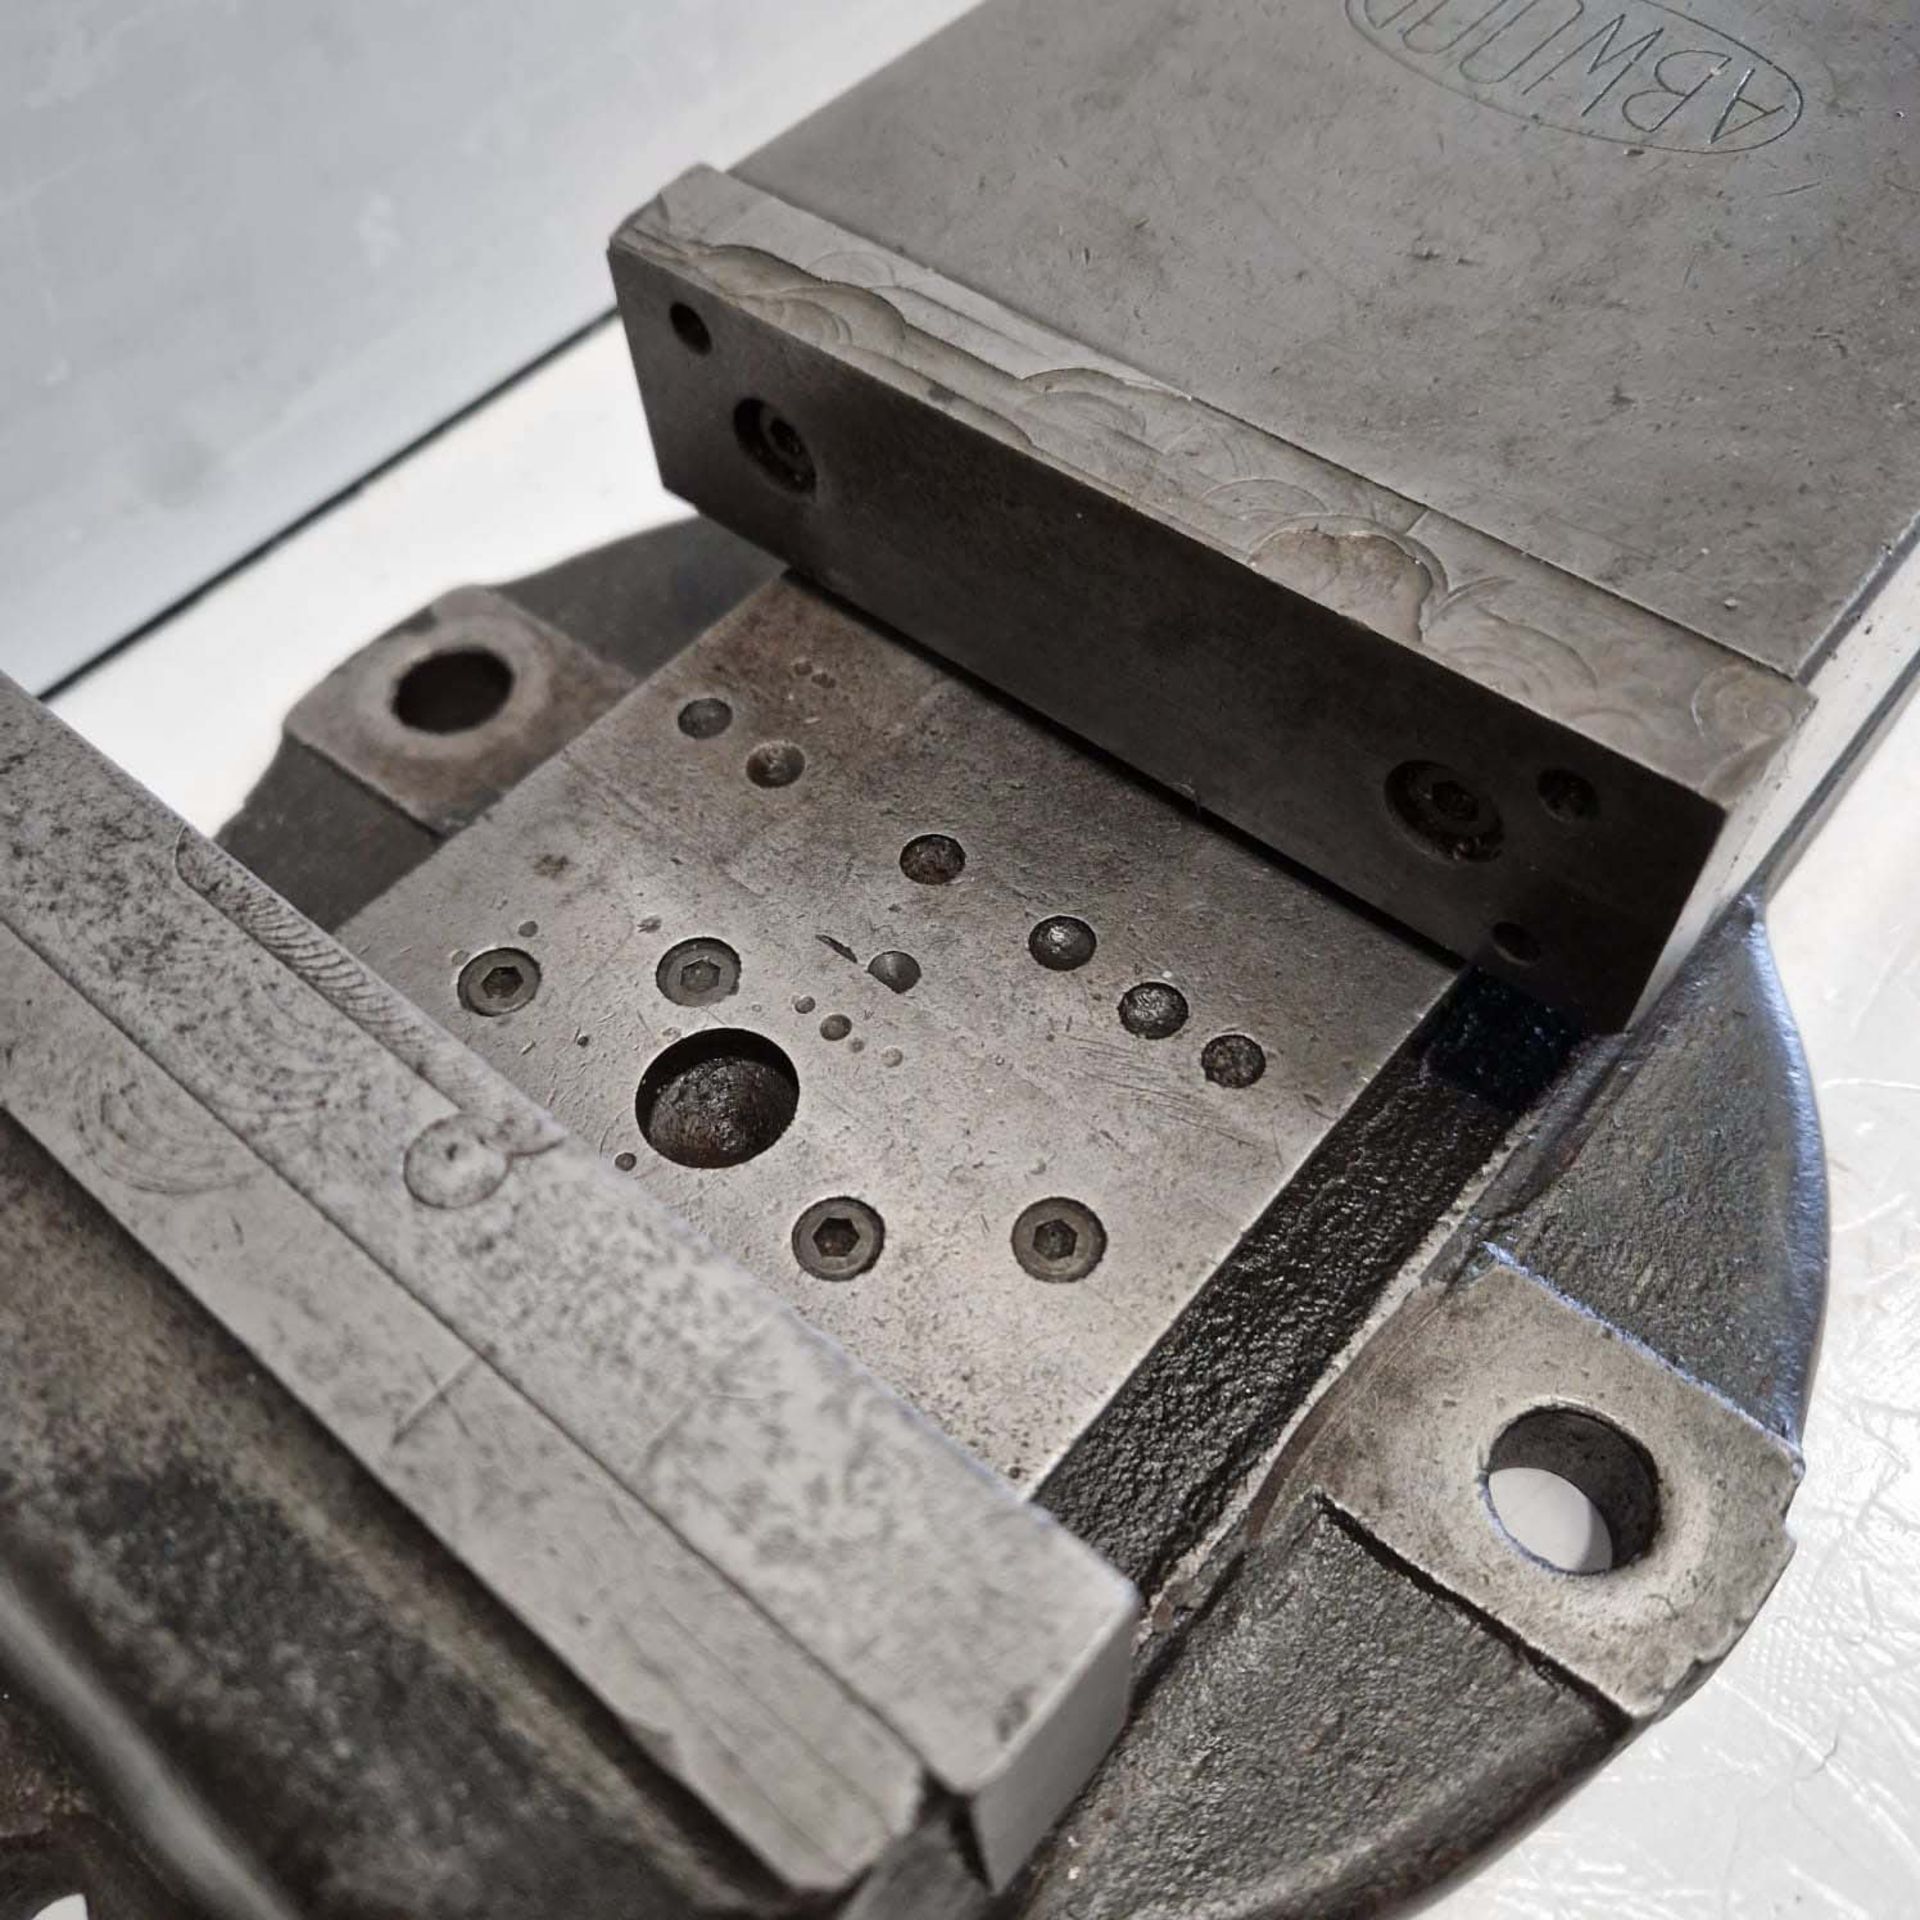 Abwood 6" Machine Vice. Width of Jaws 6 1/2". Height of Jaws 1 3/4". Max Opening of Jaws 6". - Image 5 of 6